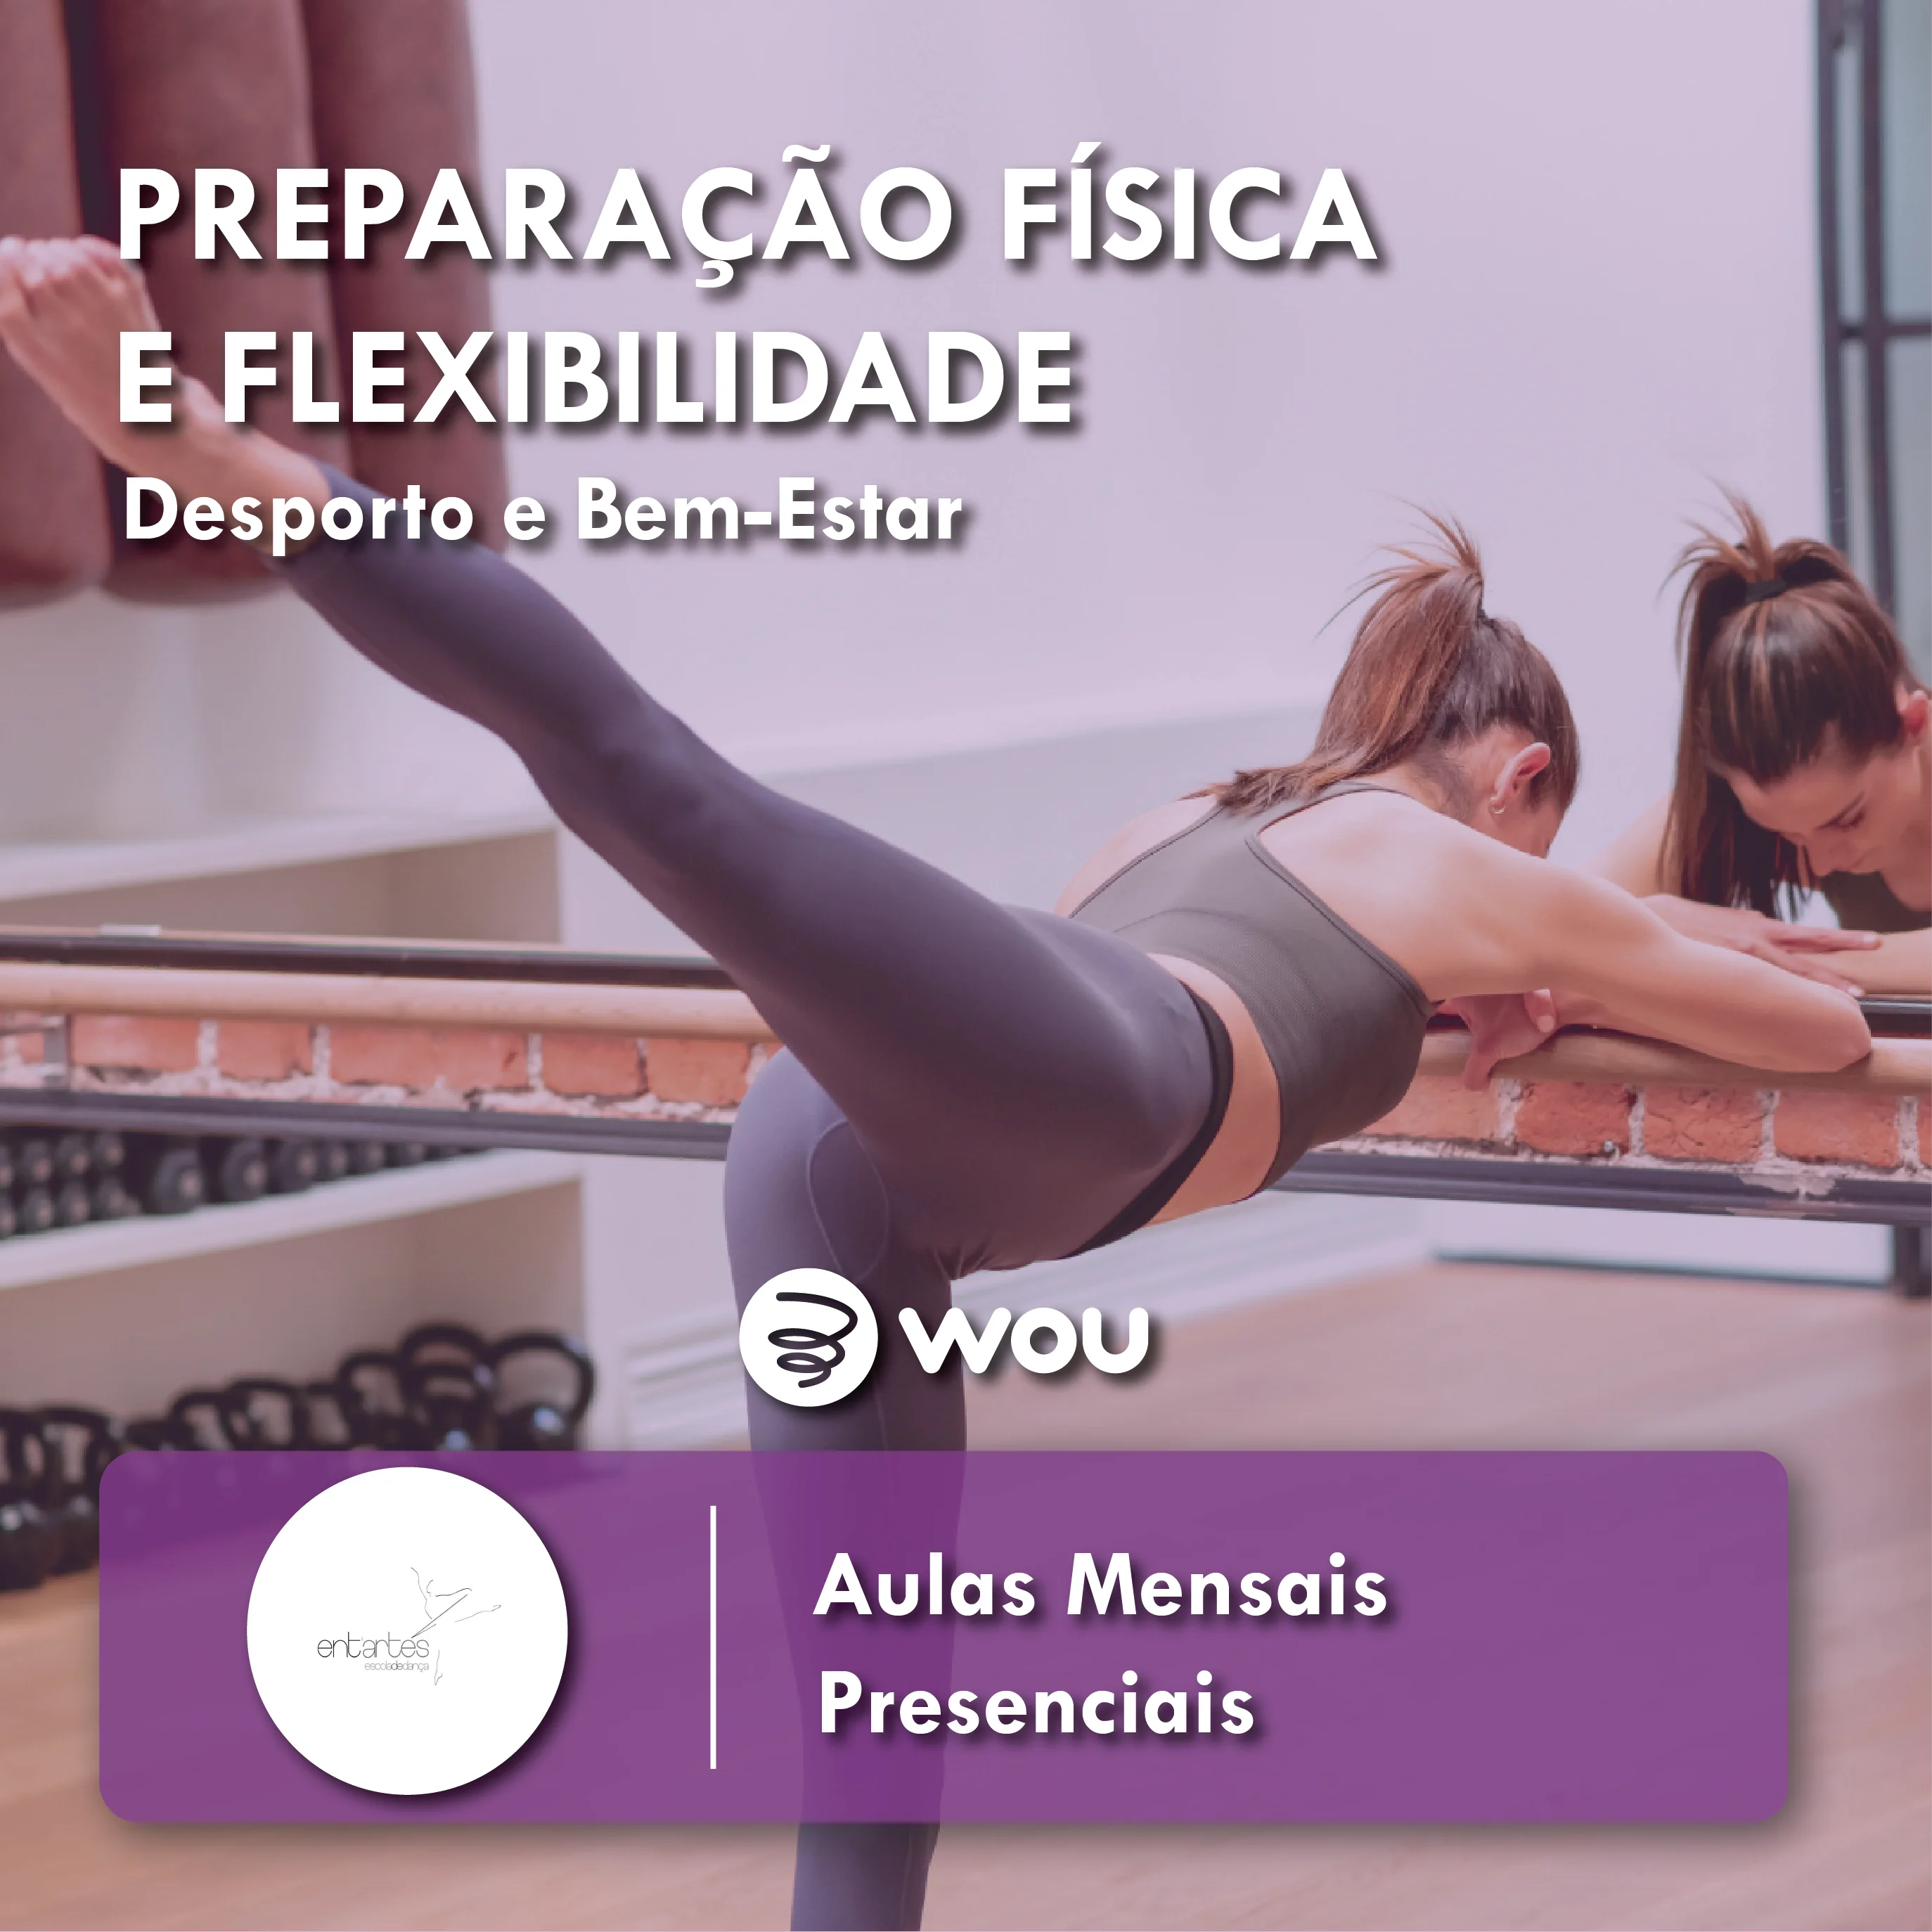 Classes of Physical Preparation and Flexibility in Braga